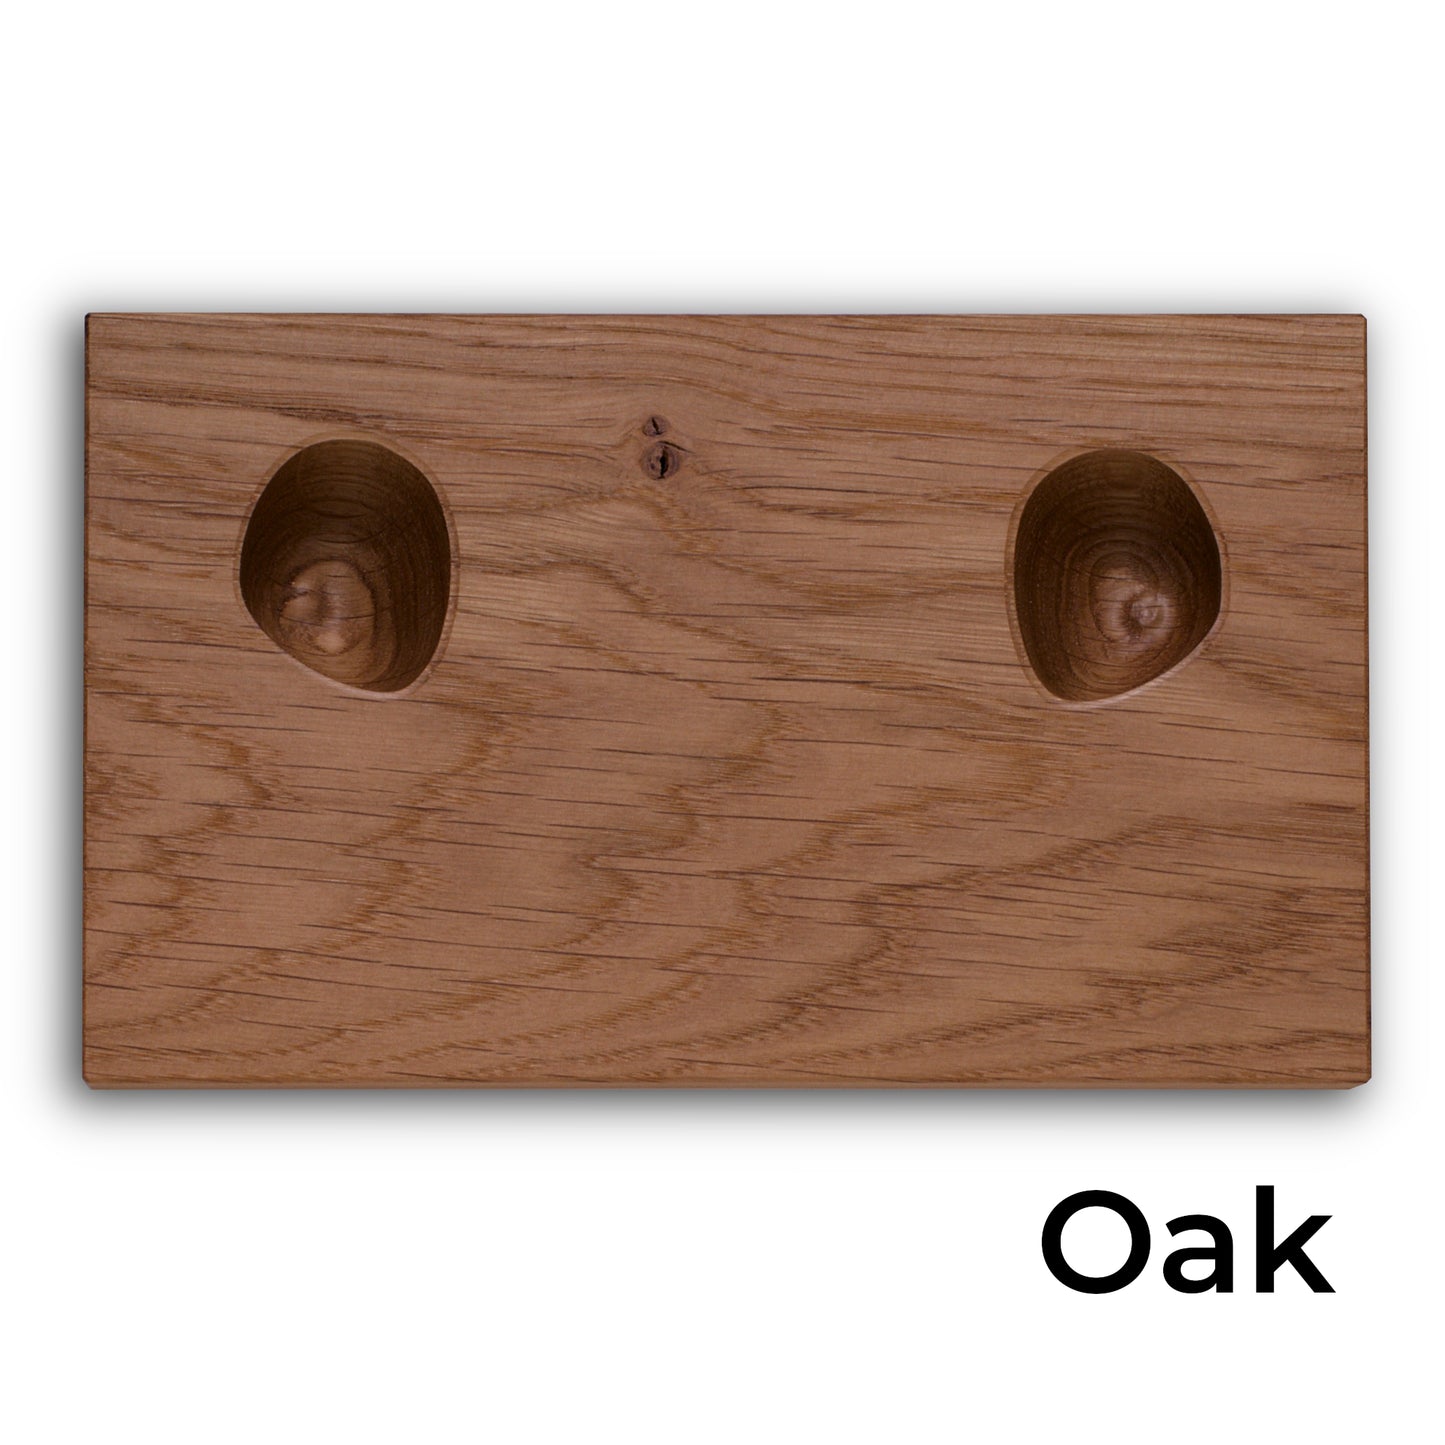 Wooden stand in oak for Playstation 4 dualshock controller